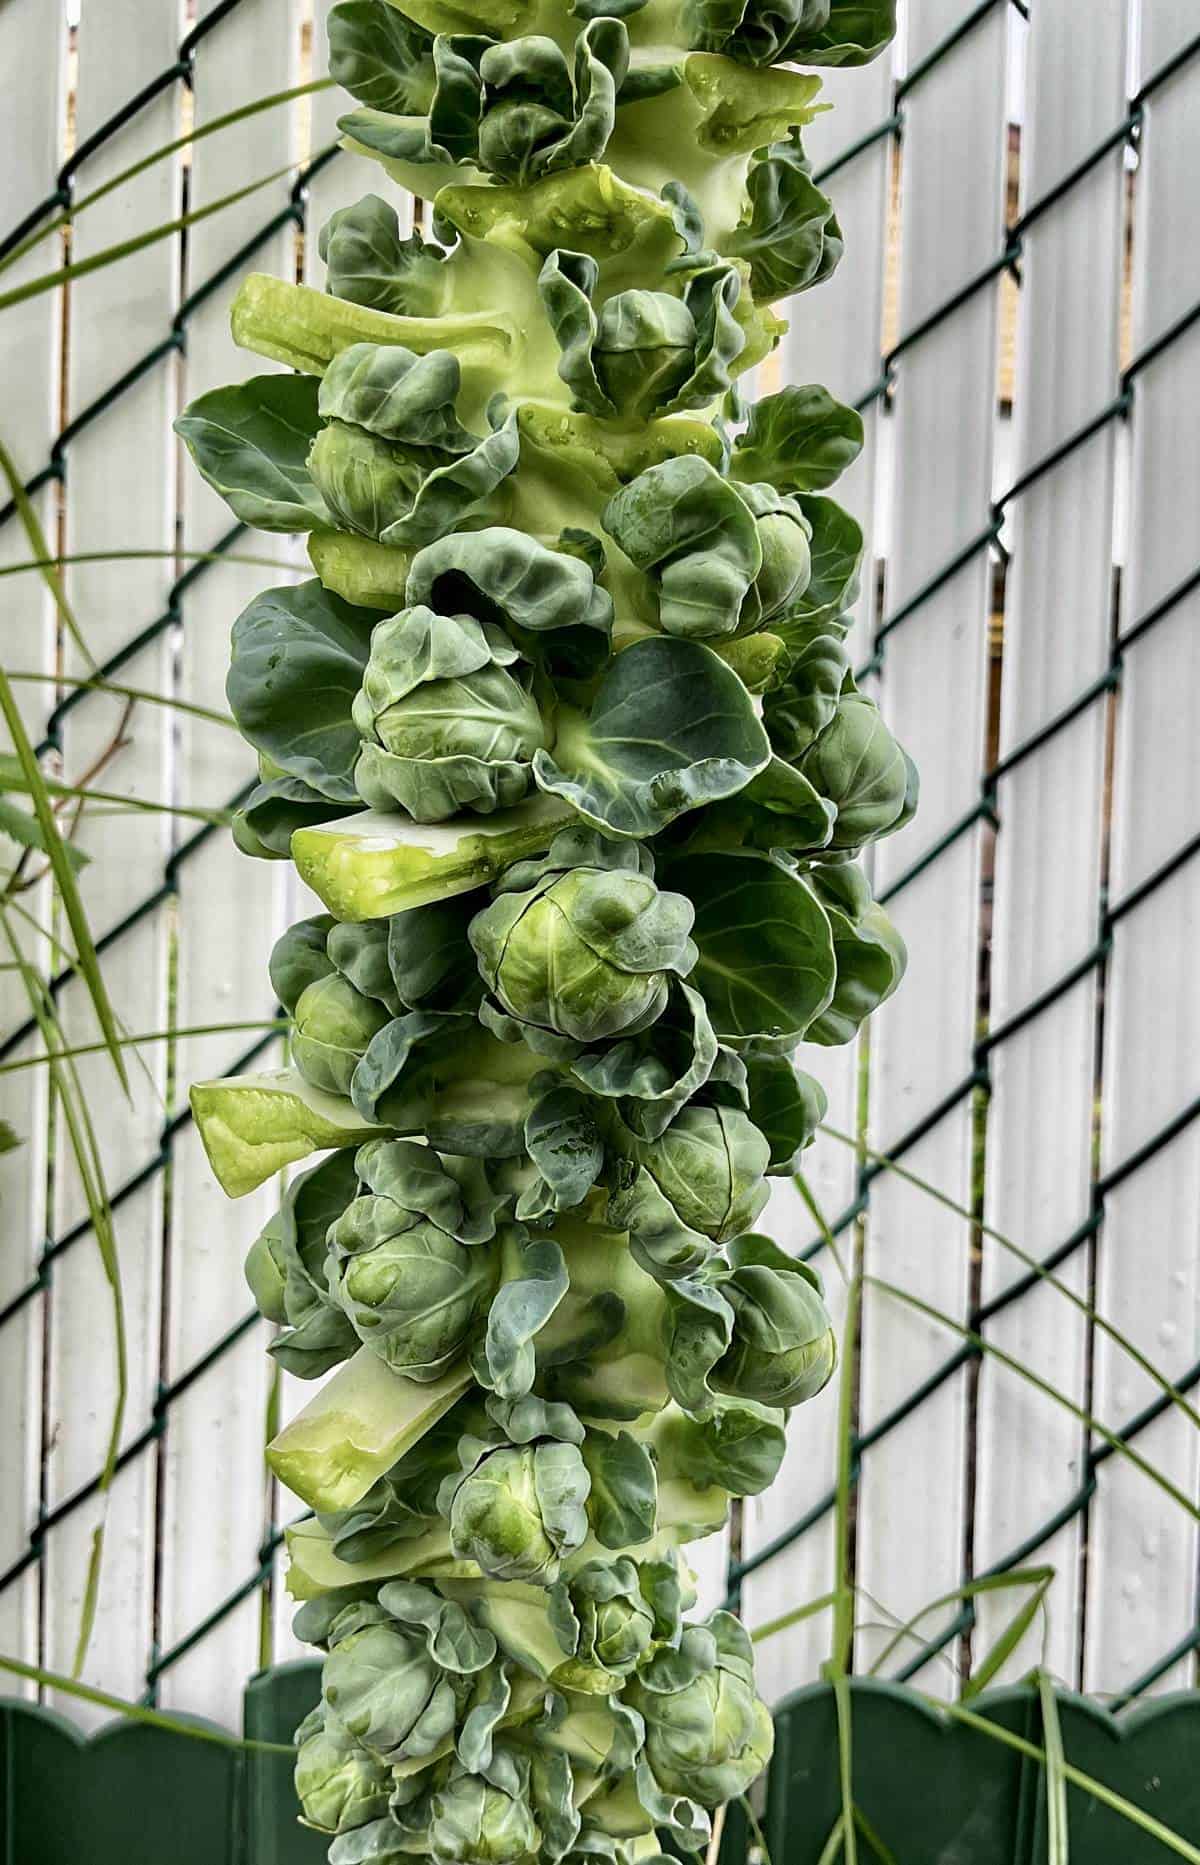 A photo of fresh Brussels sprouts on a stalk.